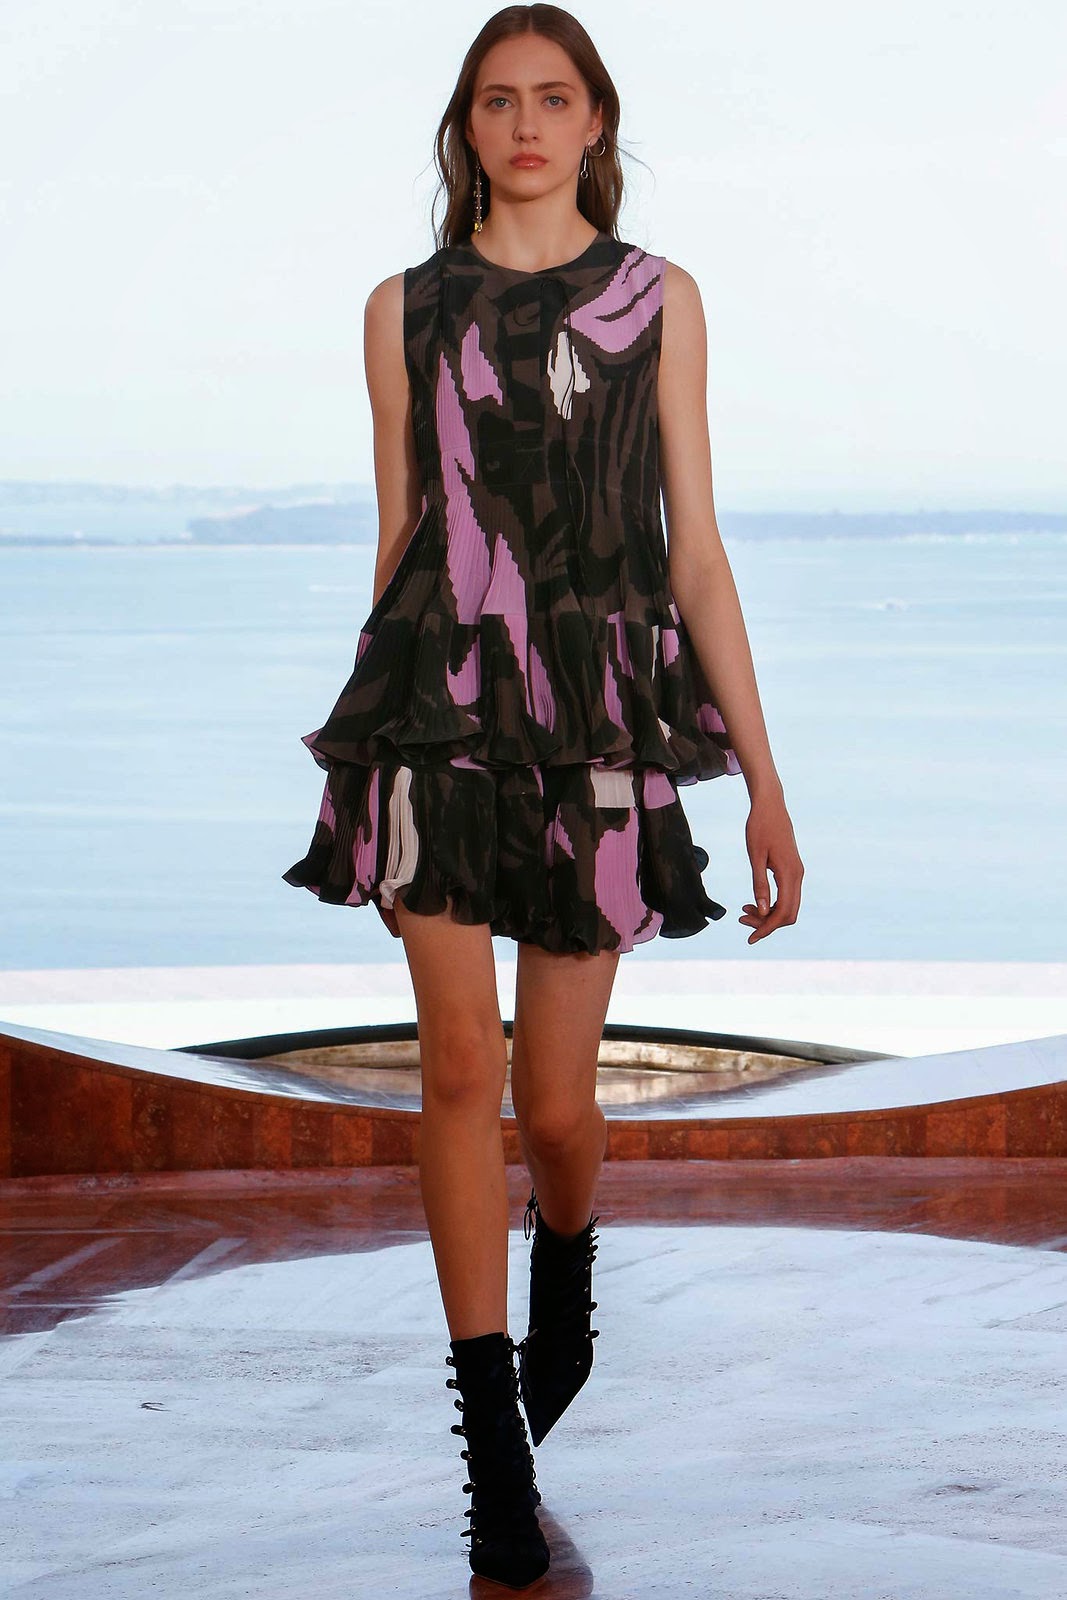 ANDREA JANKE Finest Accessories: DIOR Cruise 2016 Palais Bulles